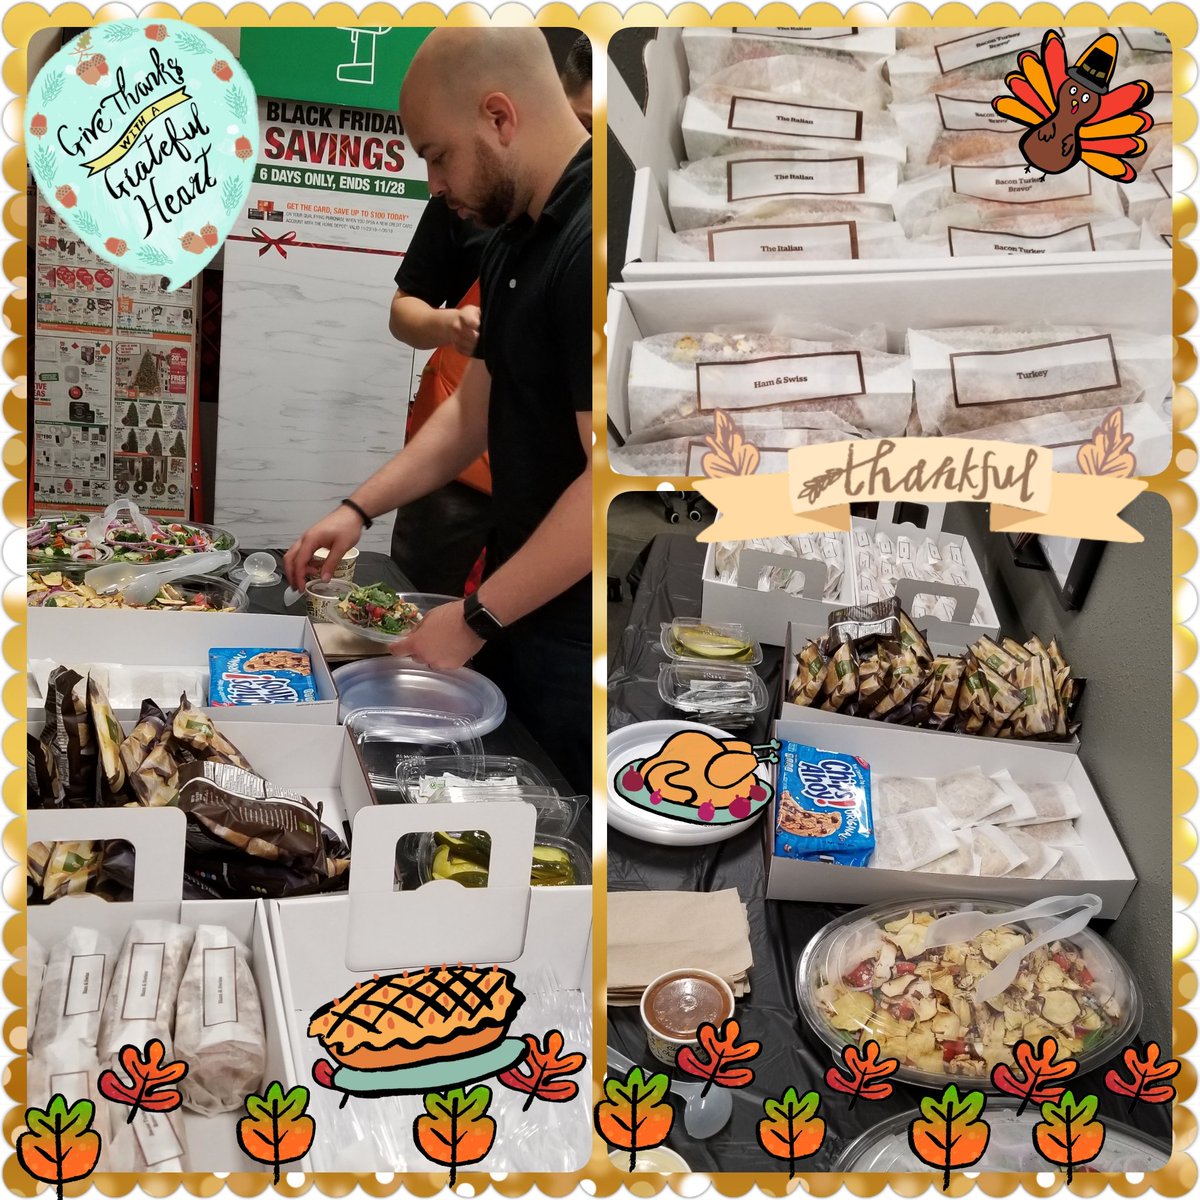 Thanksgiving Dinner at Oxnard Home Depot 🧡 To all my HD family, I appreciate each and every one of you! May you all have an amazing Thanksgiving day with your loved ones 🦃 #team1040 @RianSM1040 @MarcyTHD